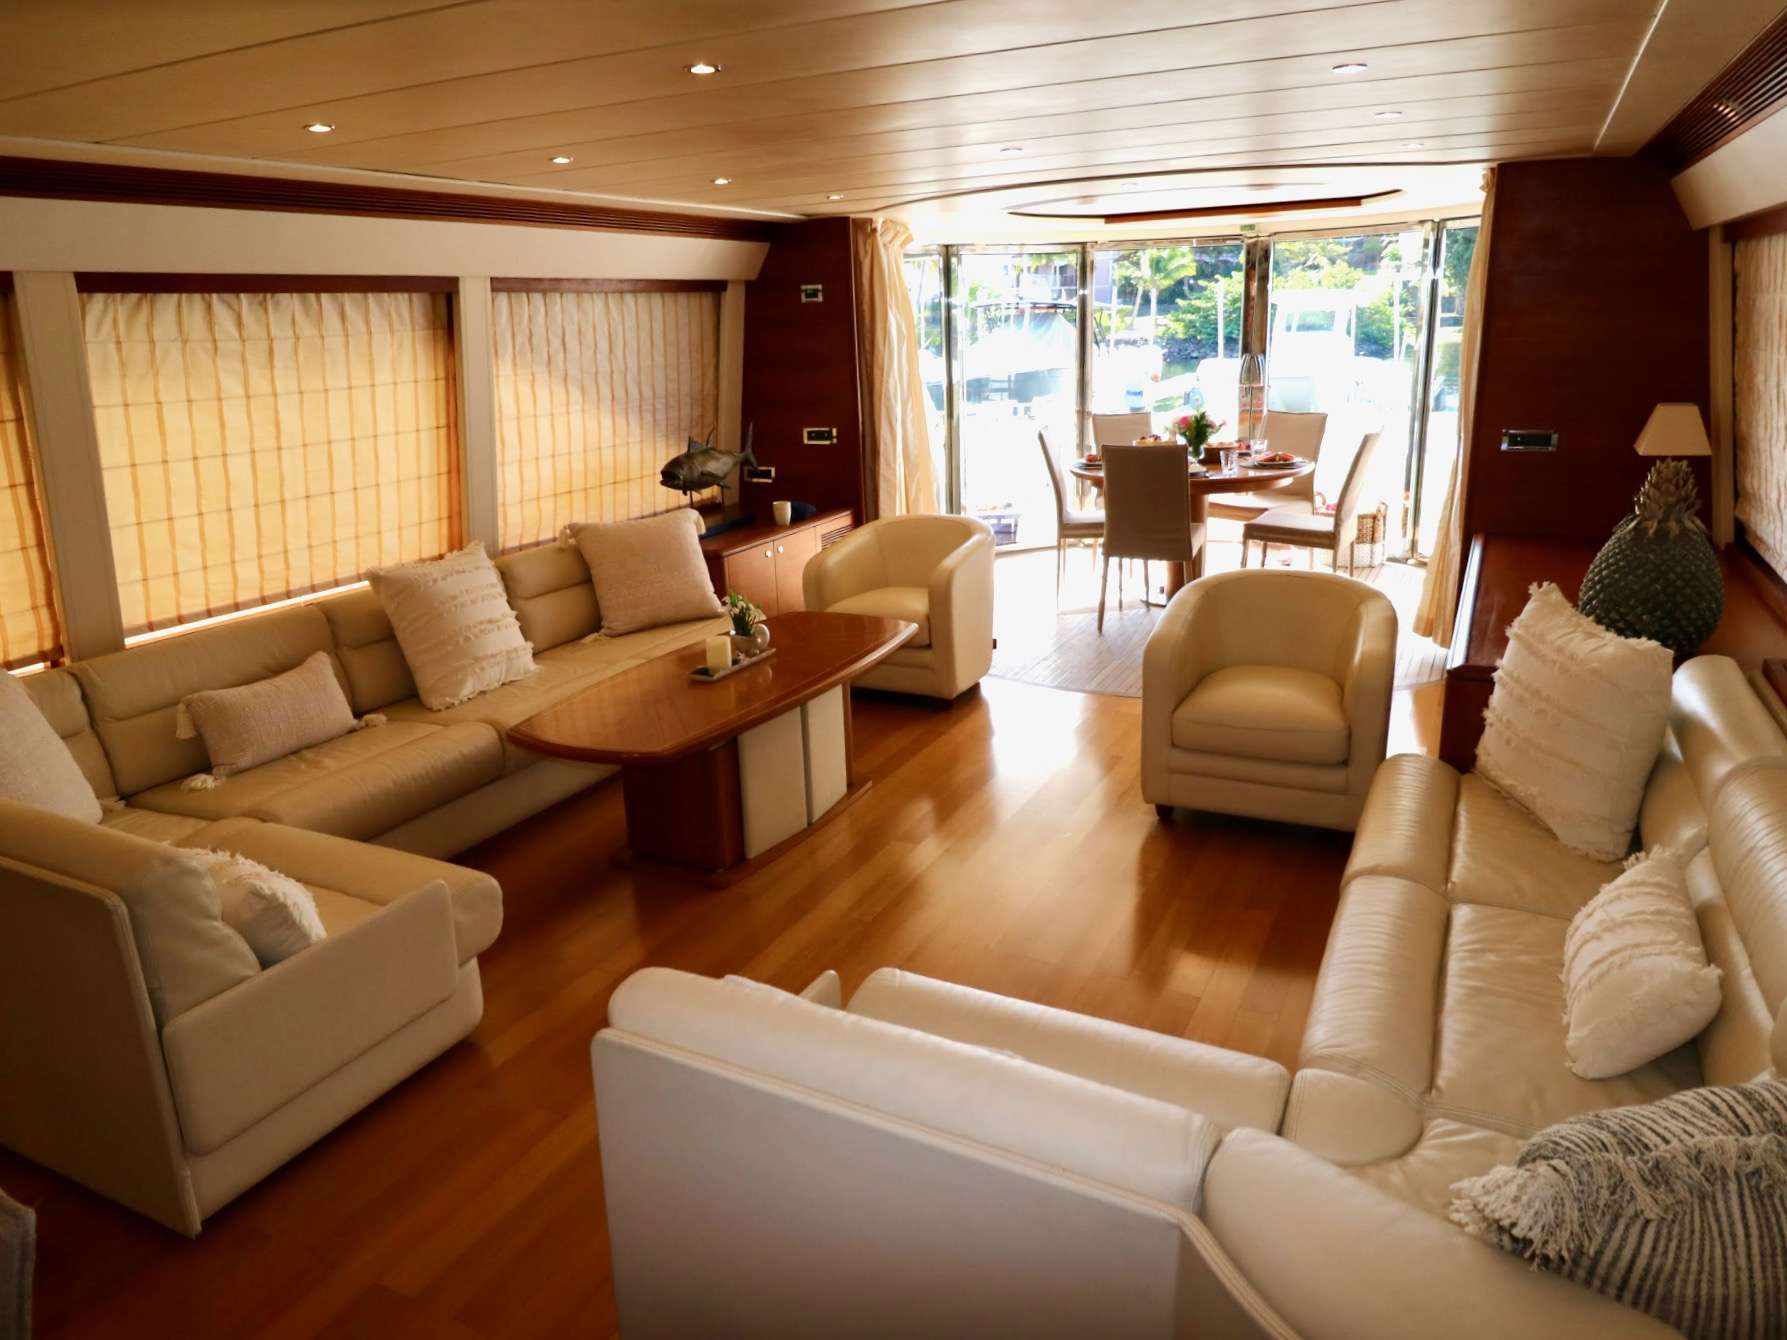 ECLIPSE 114 - Luxury yacht charter Bahamas & Boat hire in Caribbean 3